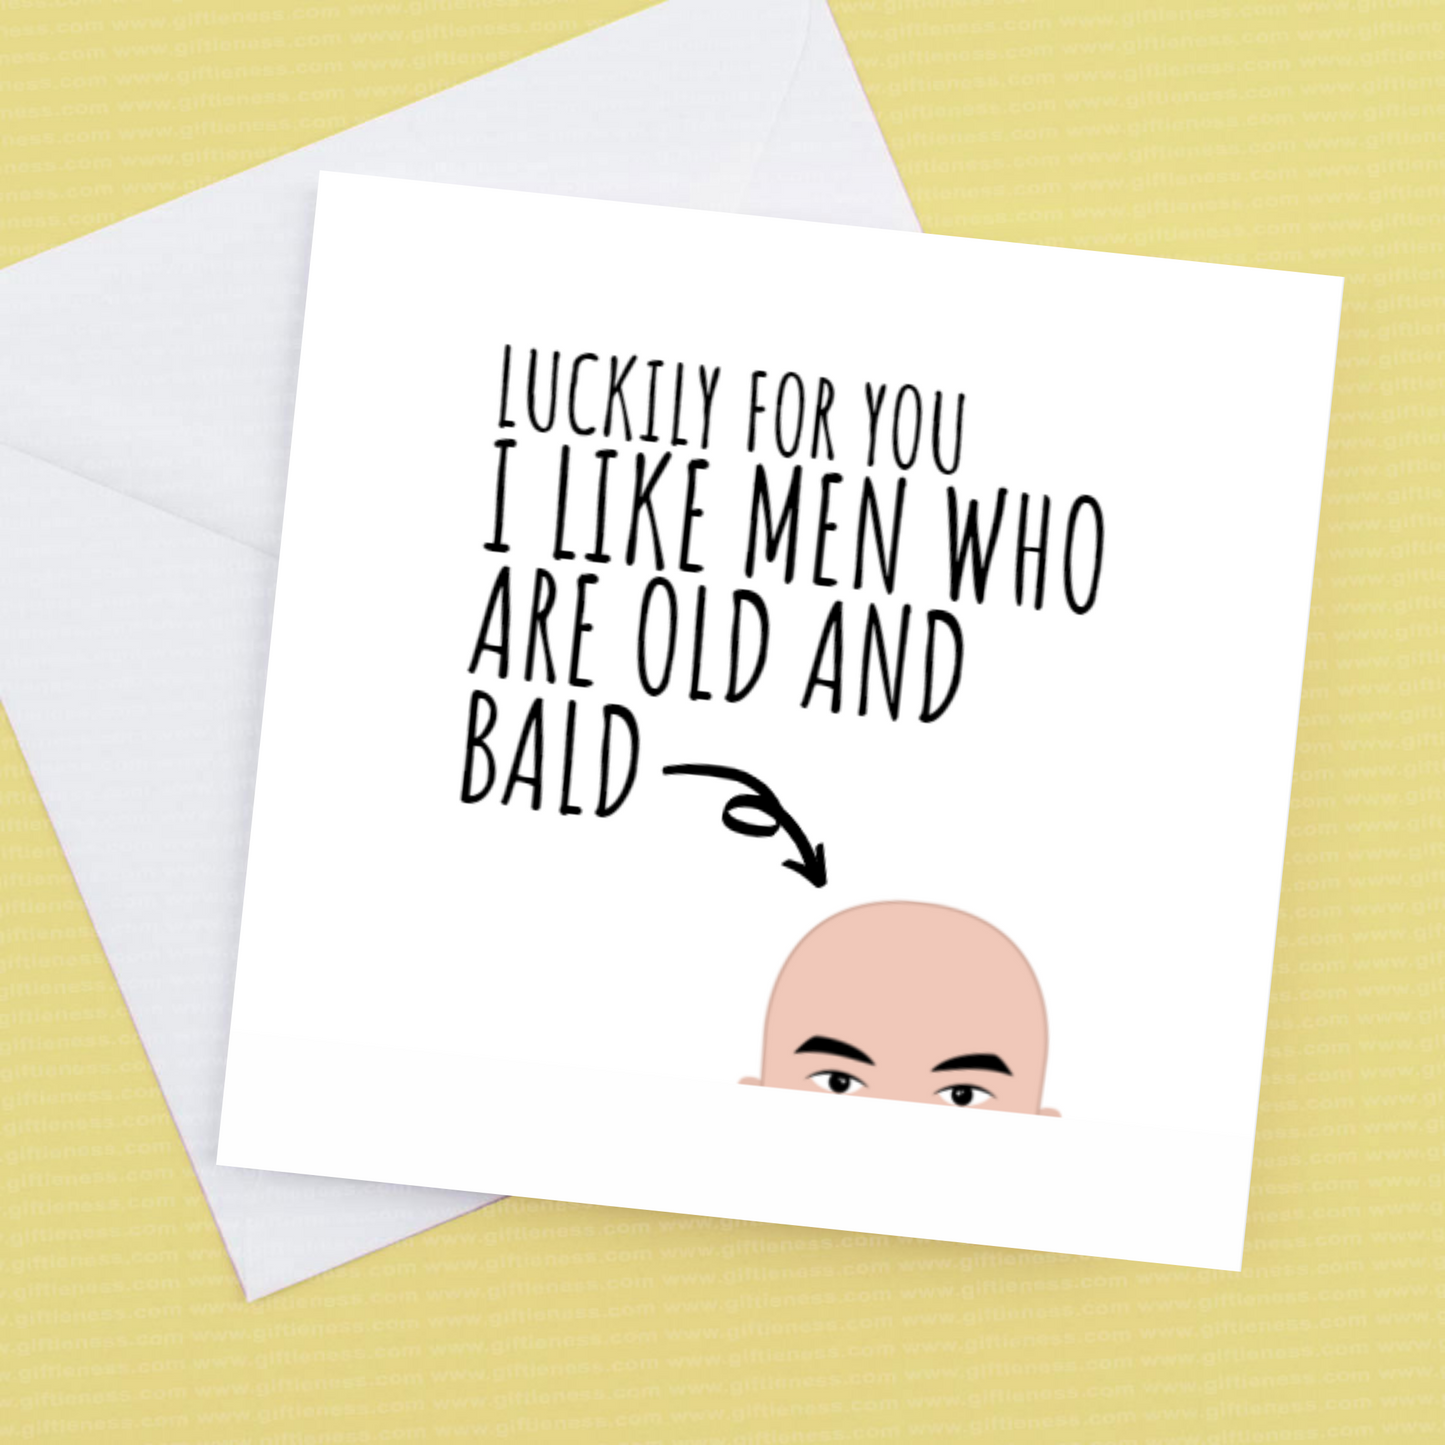 I like men who are old and bald